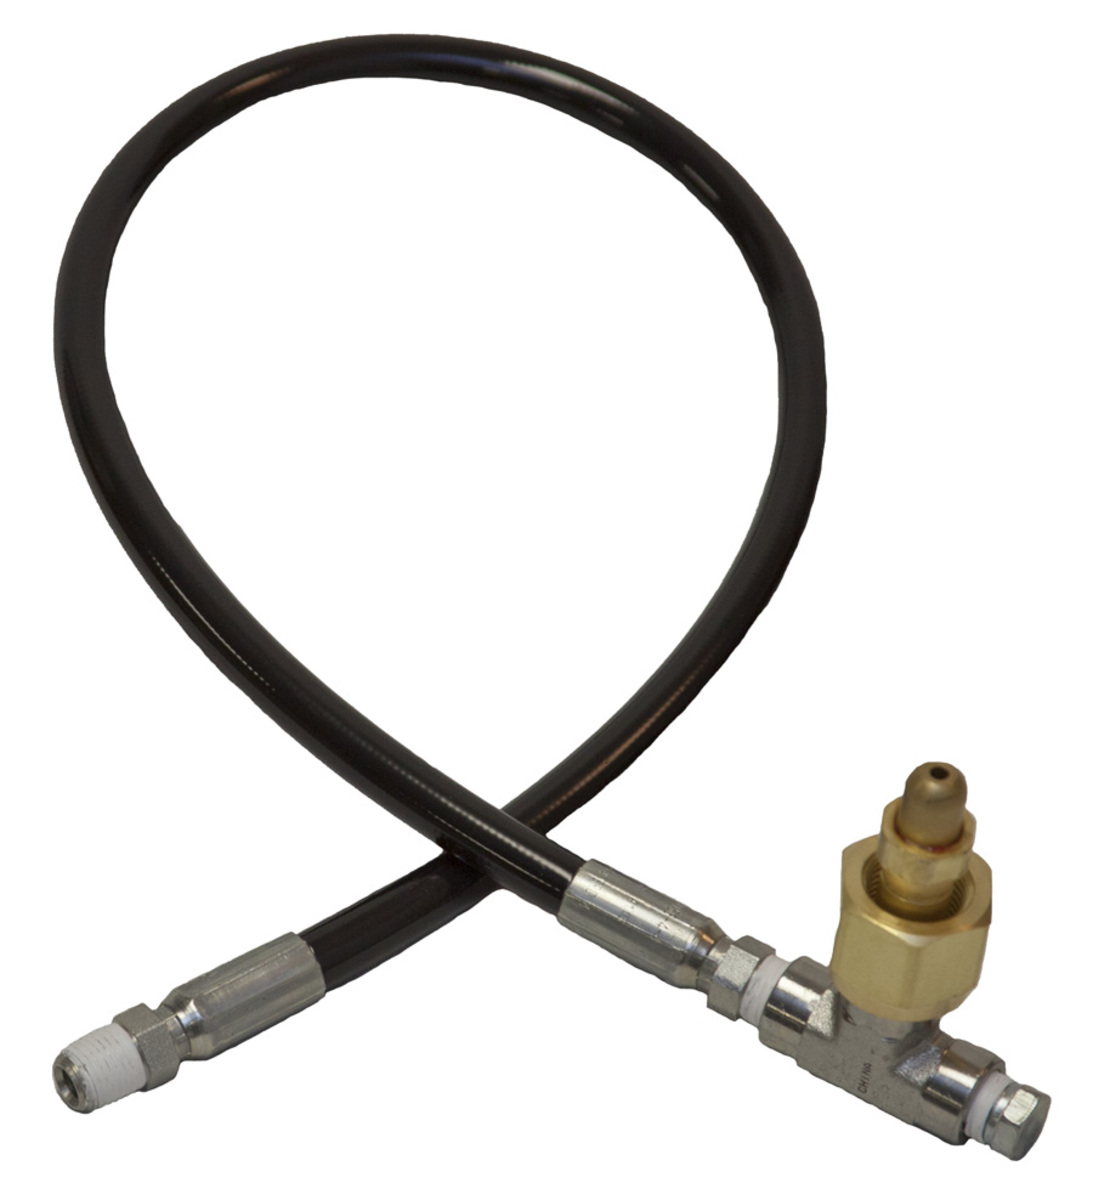 Air Systems International Cylinder Connecting Whip